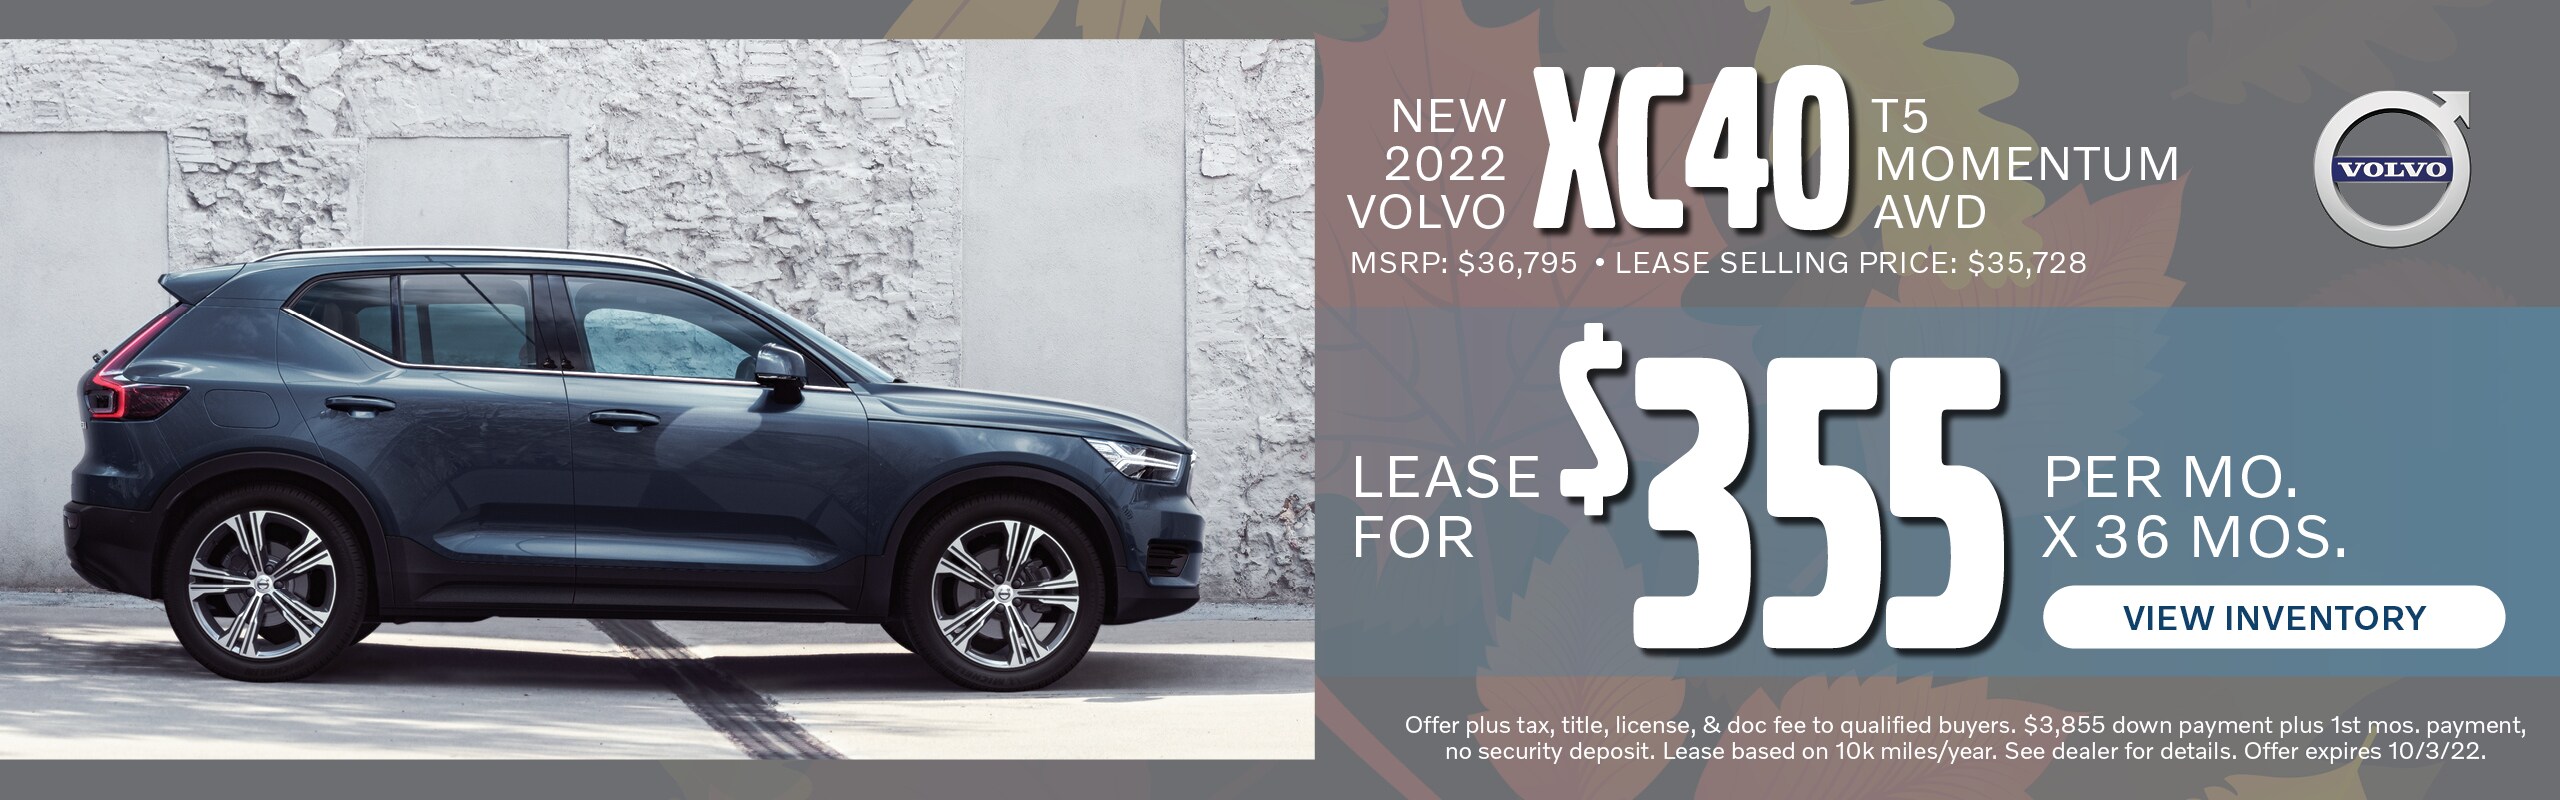 New 2022 Volvo XC40 T5 Momentum AWD lease for $355 per month for 36 months - Lease selling price: $35,728 and MSRP $36,795